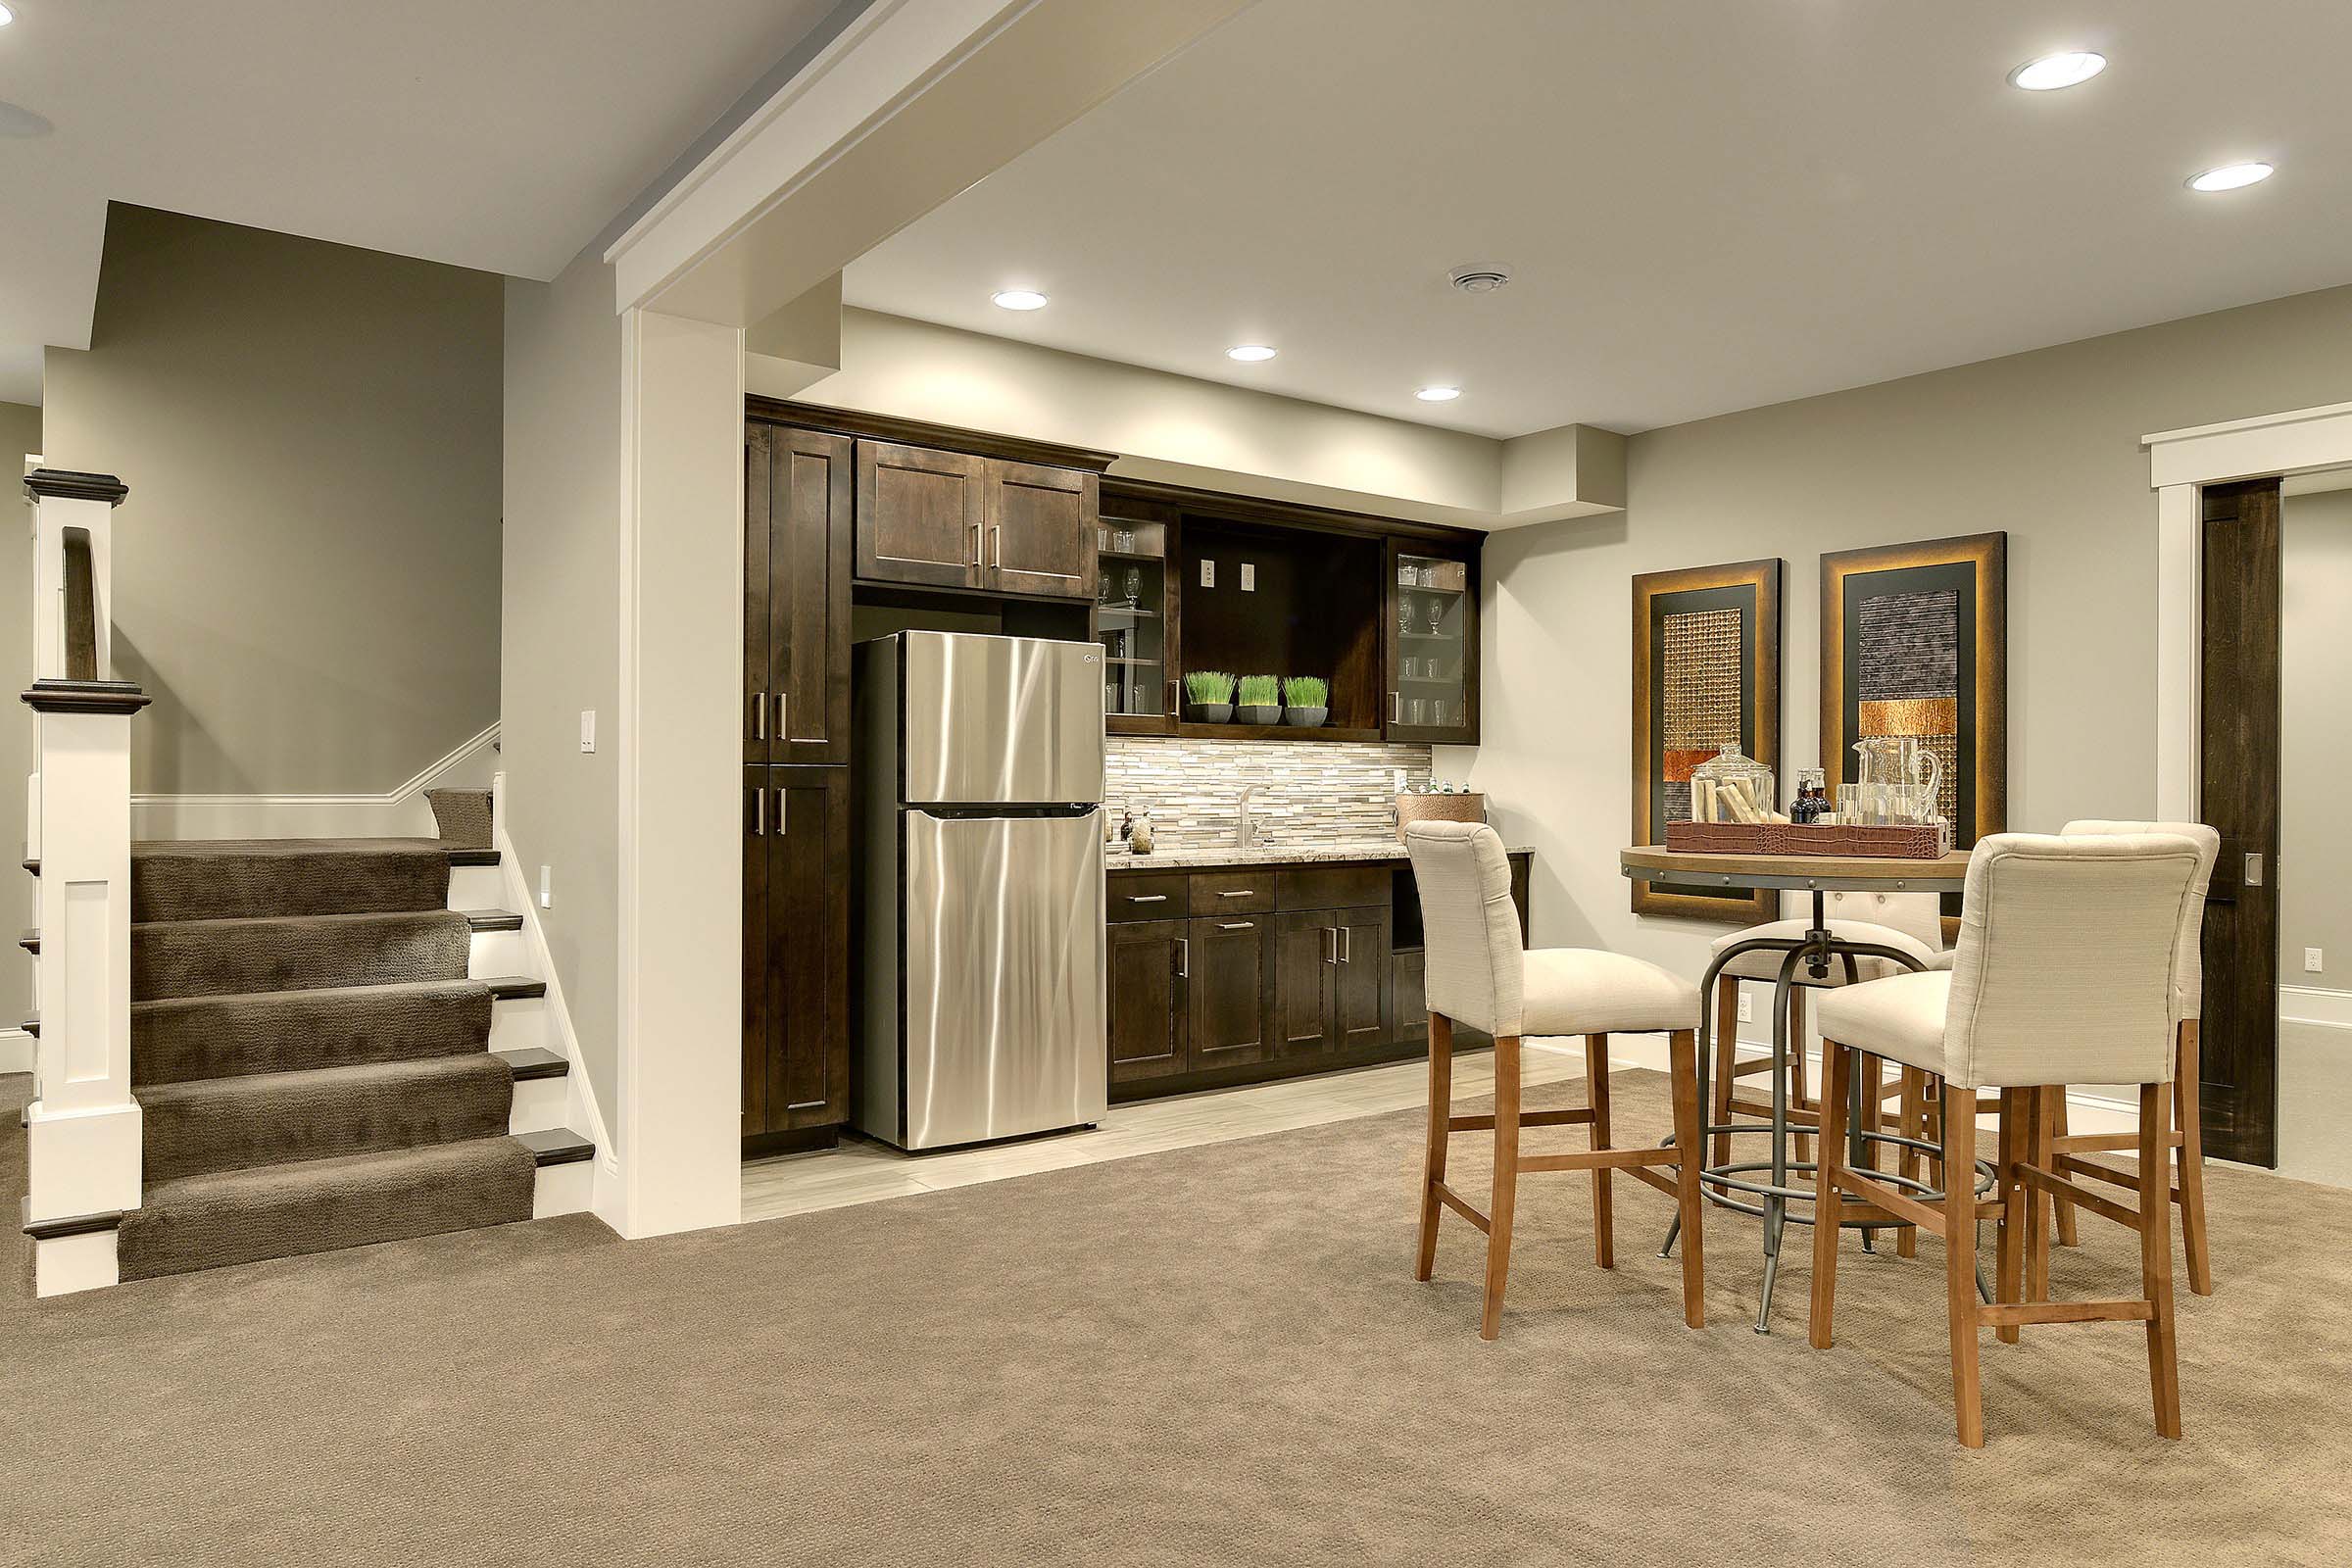 Modern lower level with kitchen area, hightop table seating and carpeted stairs to upper level.